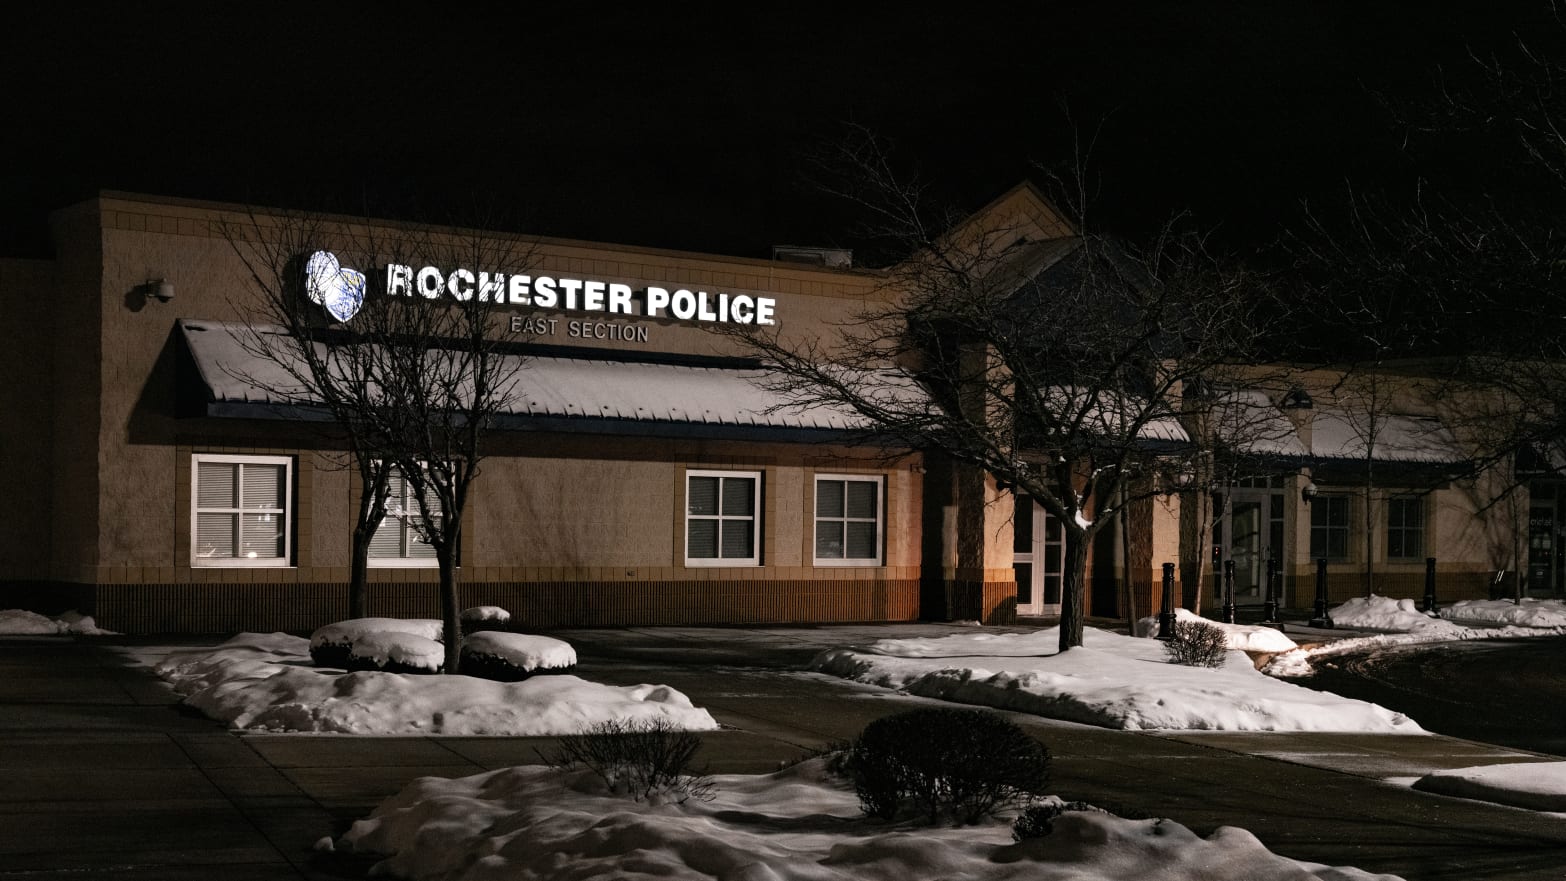 This police station in Rochester, New York around 8:00 PM on February 1, 2021.